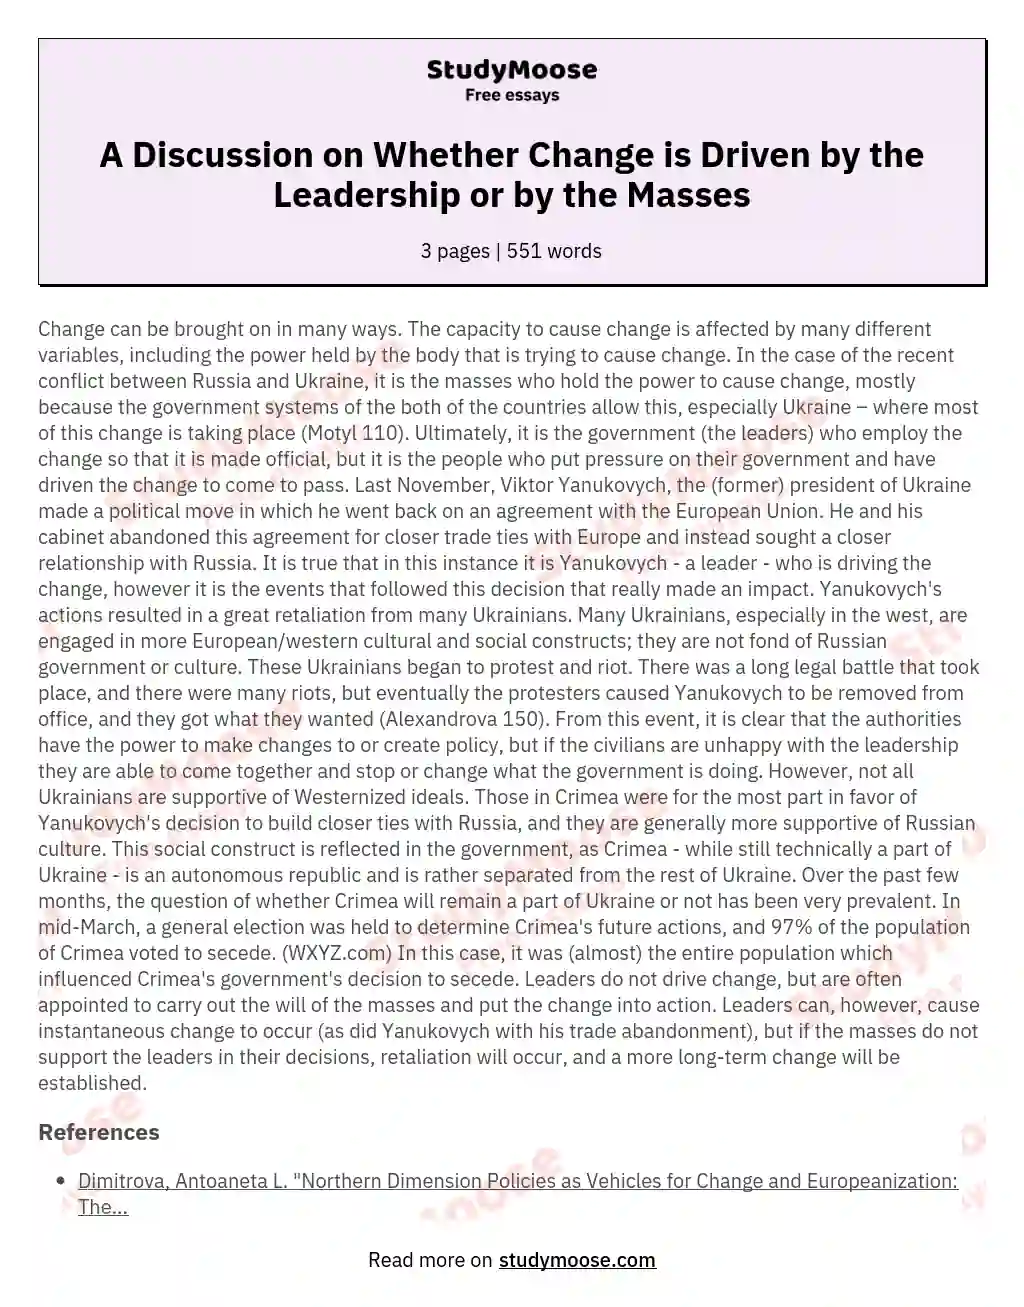 A Discussion on Whether Change is Driven by the Leadership or by the Masses essay